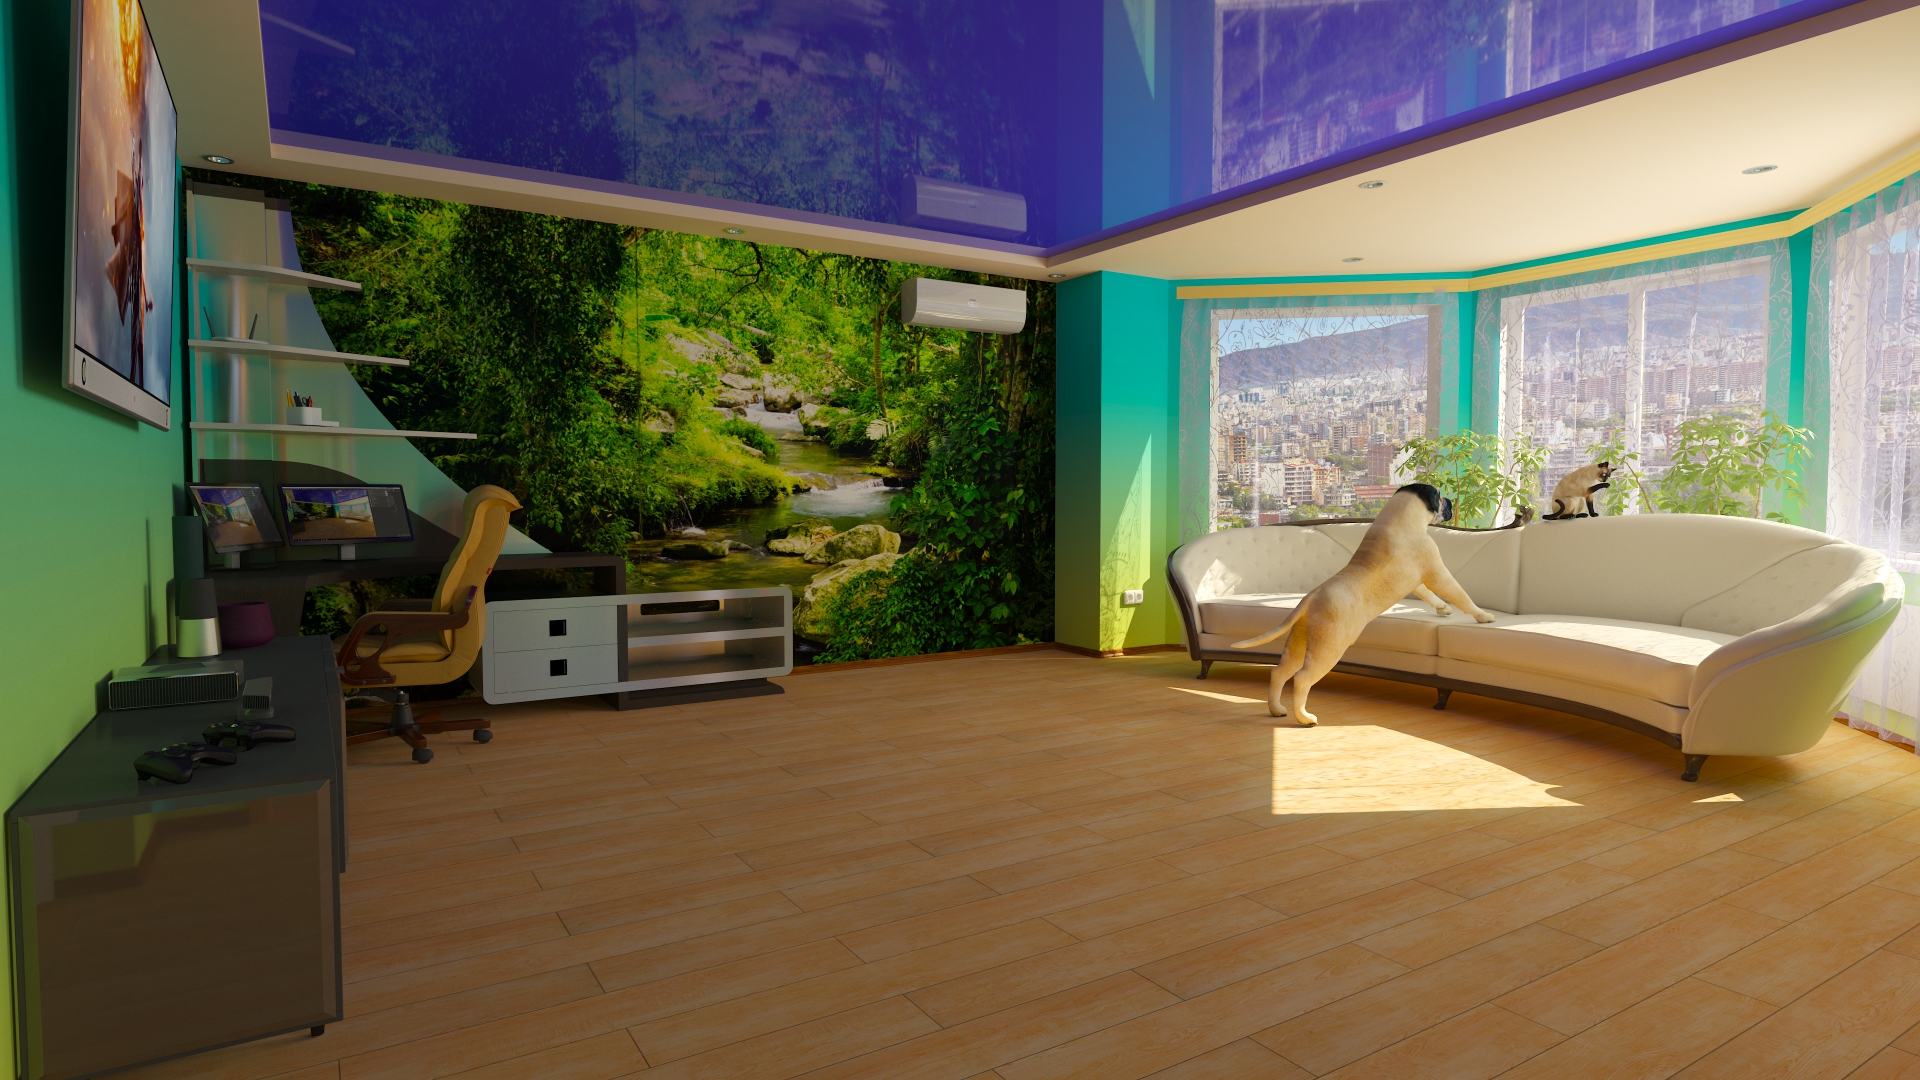 My appartement in 3d max vray 3.0 image